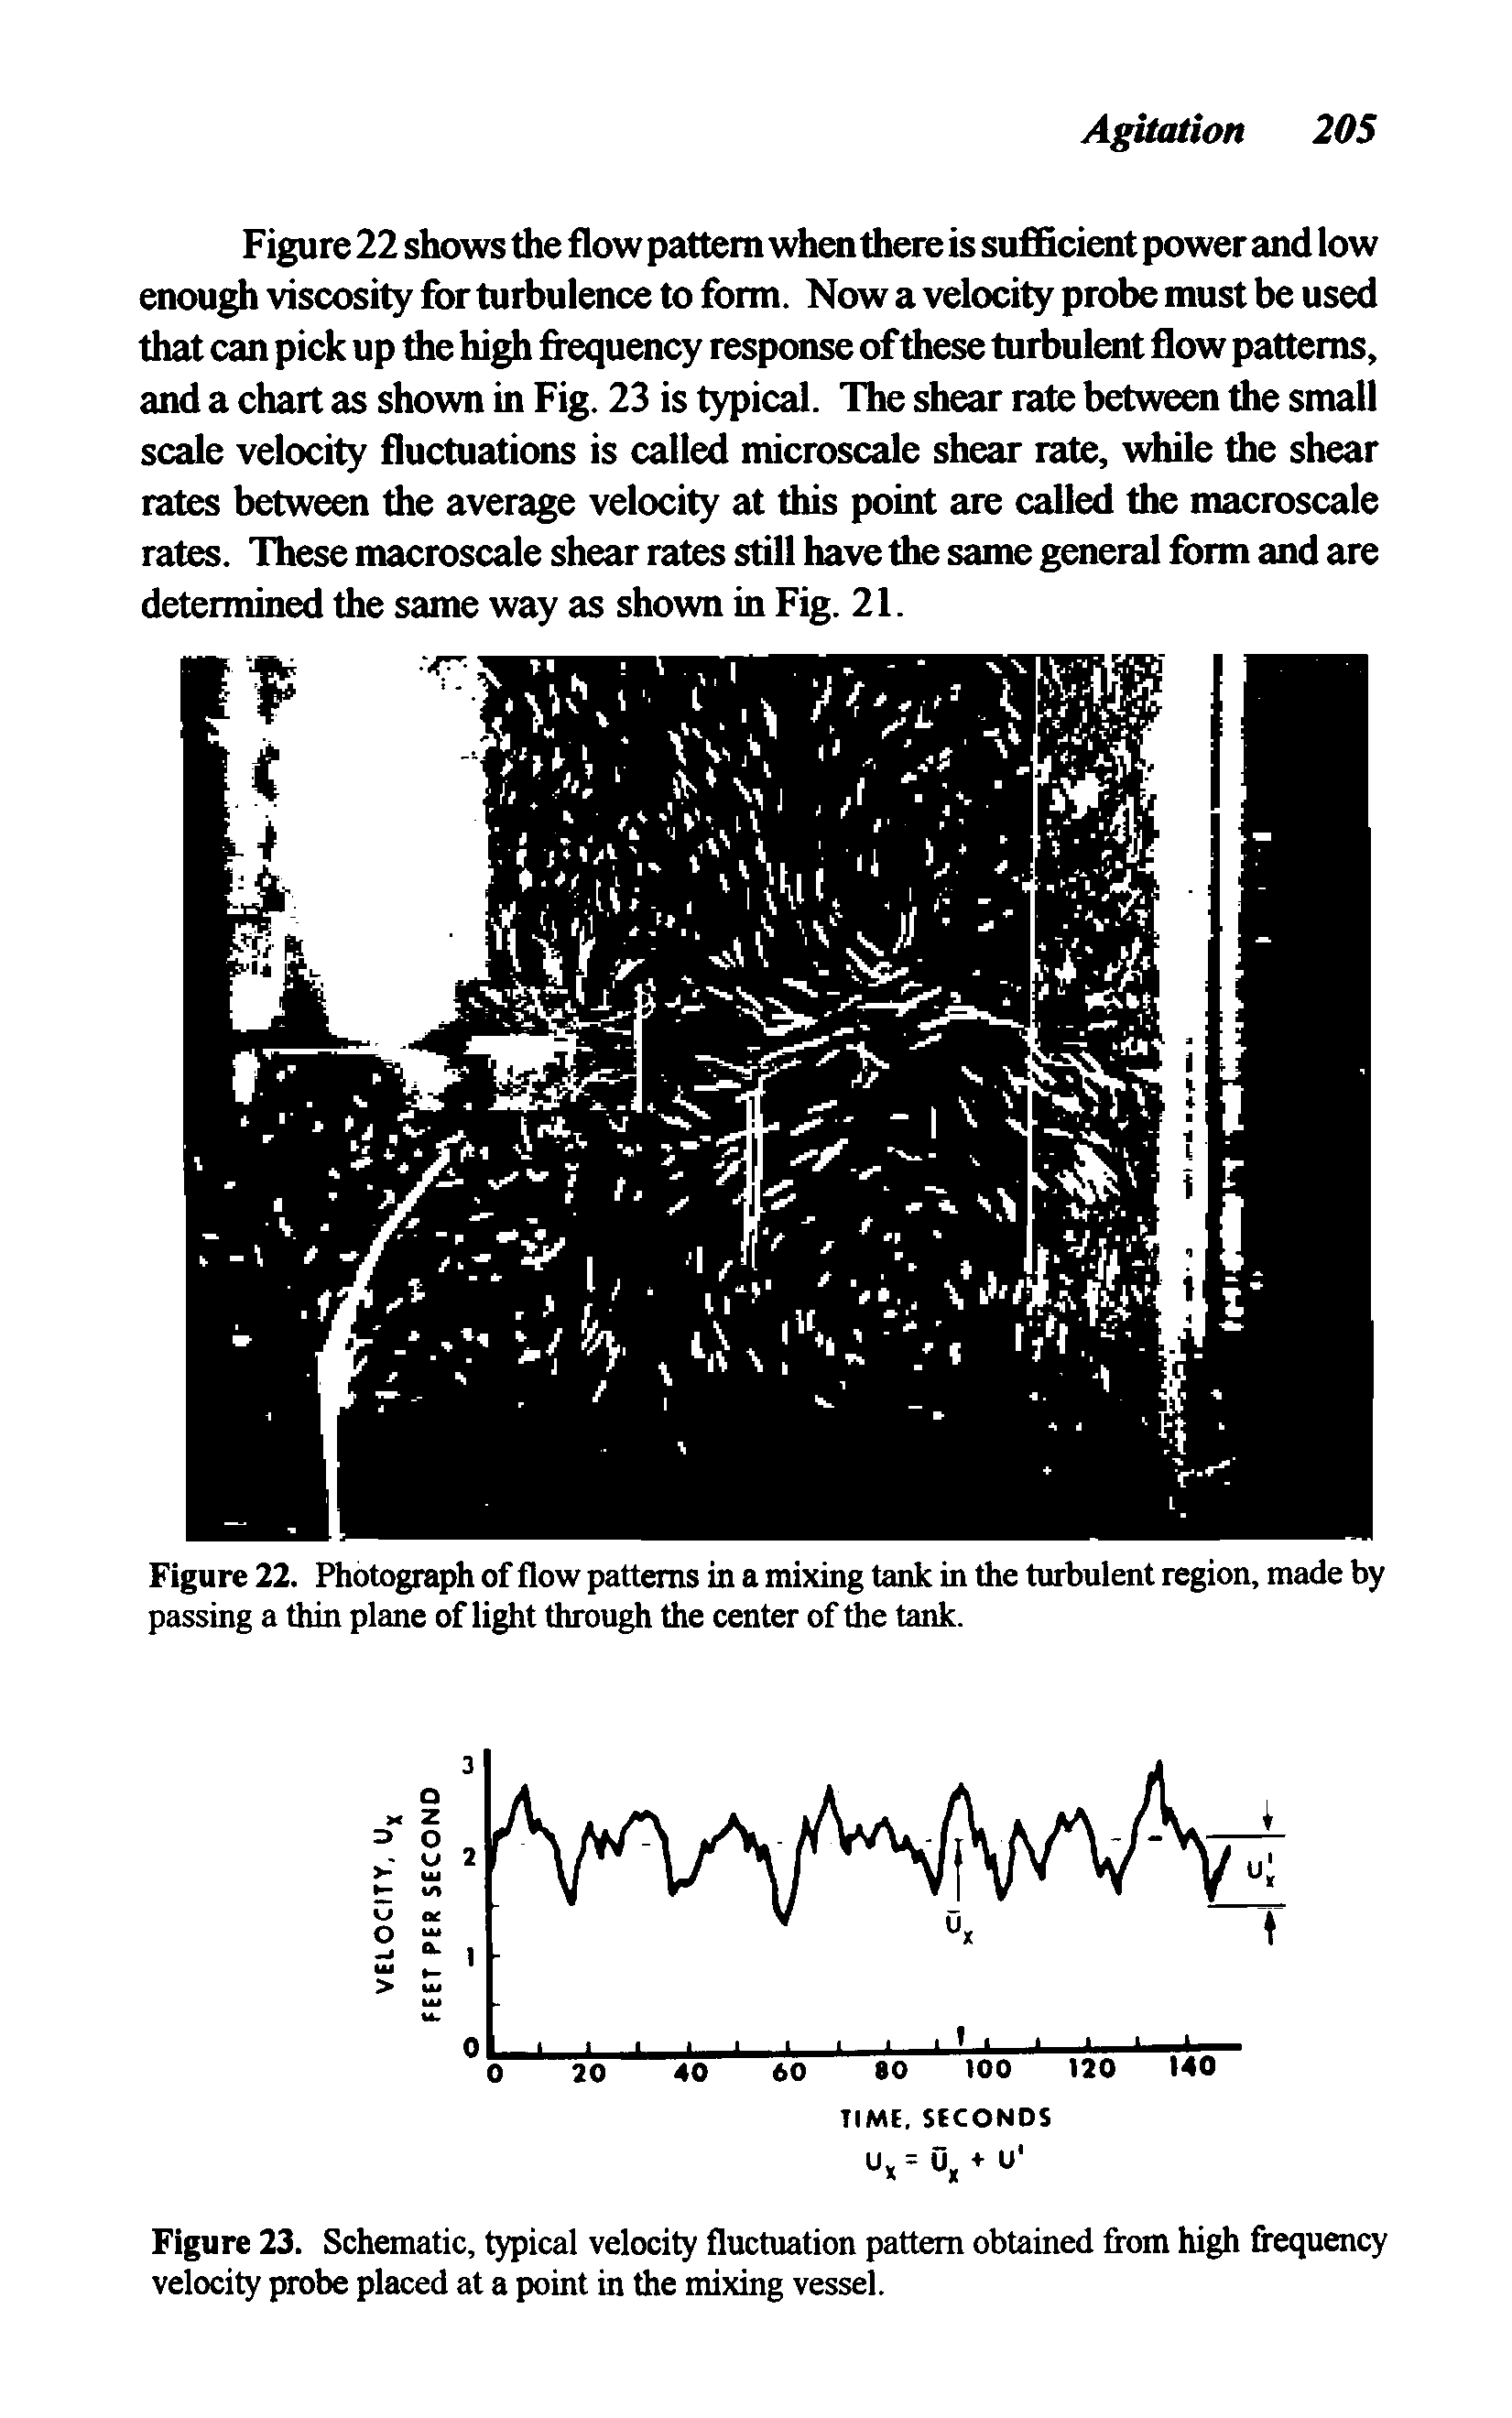 Figure 22. Photograph of flow patterns in a mixing tank in the turbulent region, made by passing a thin plane of light through the center of the tank.